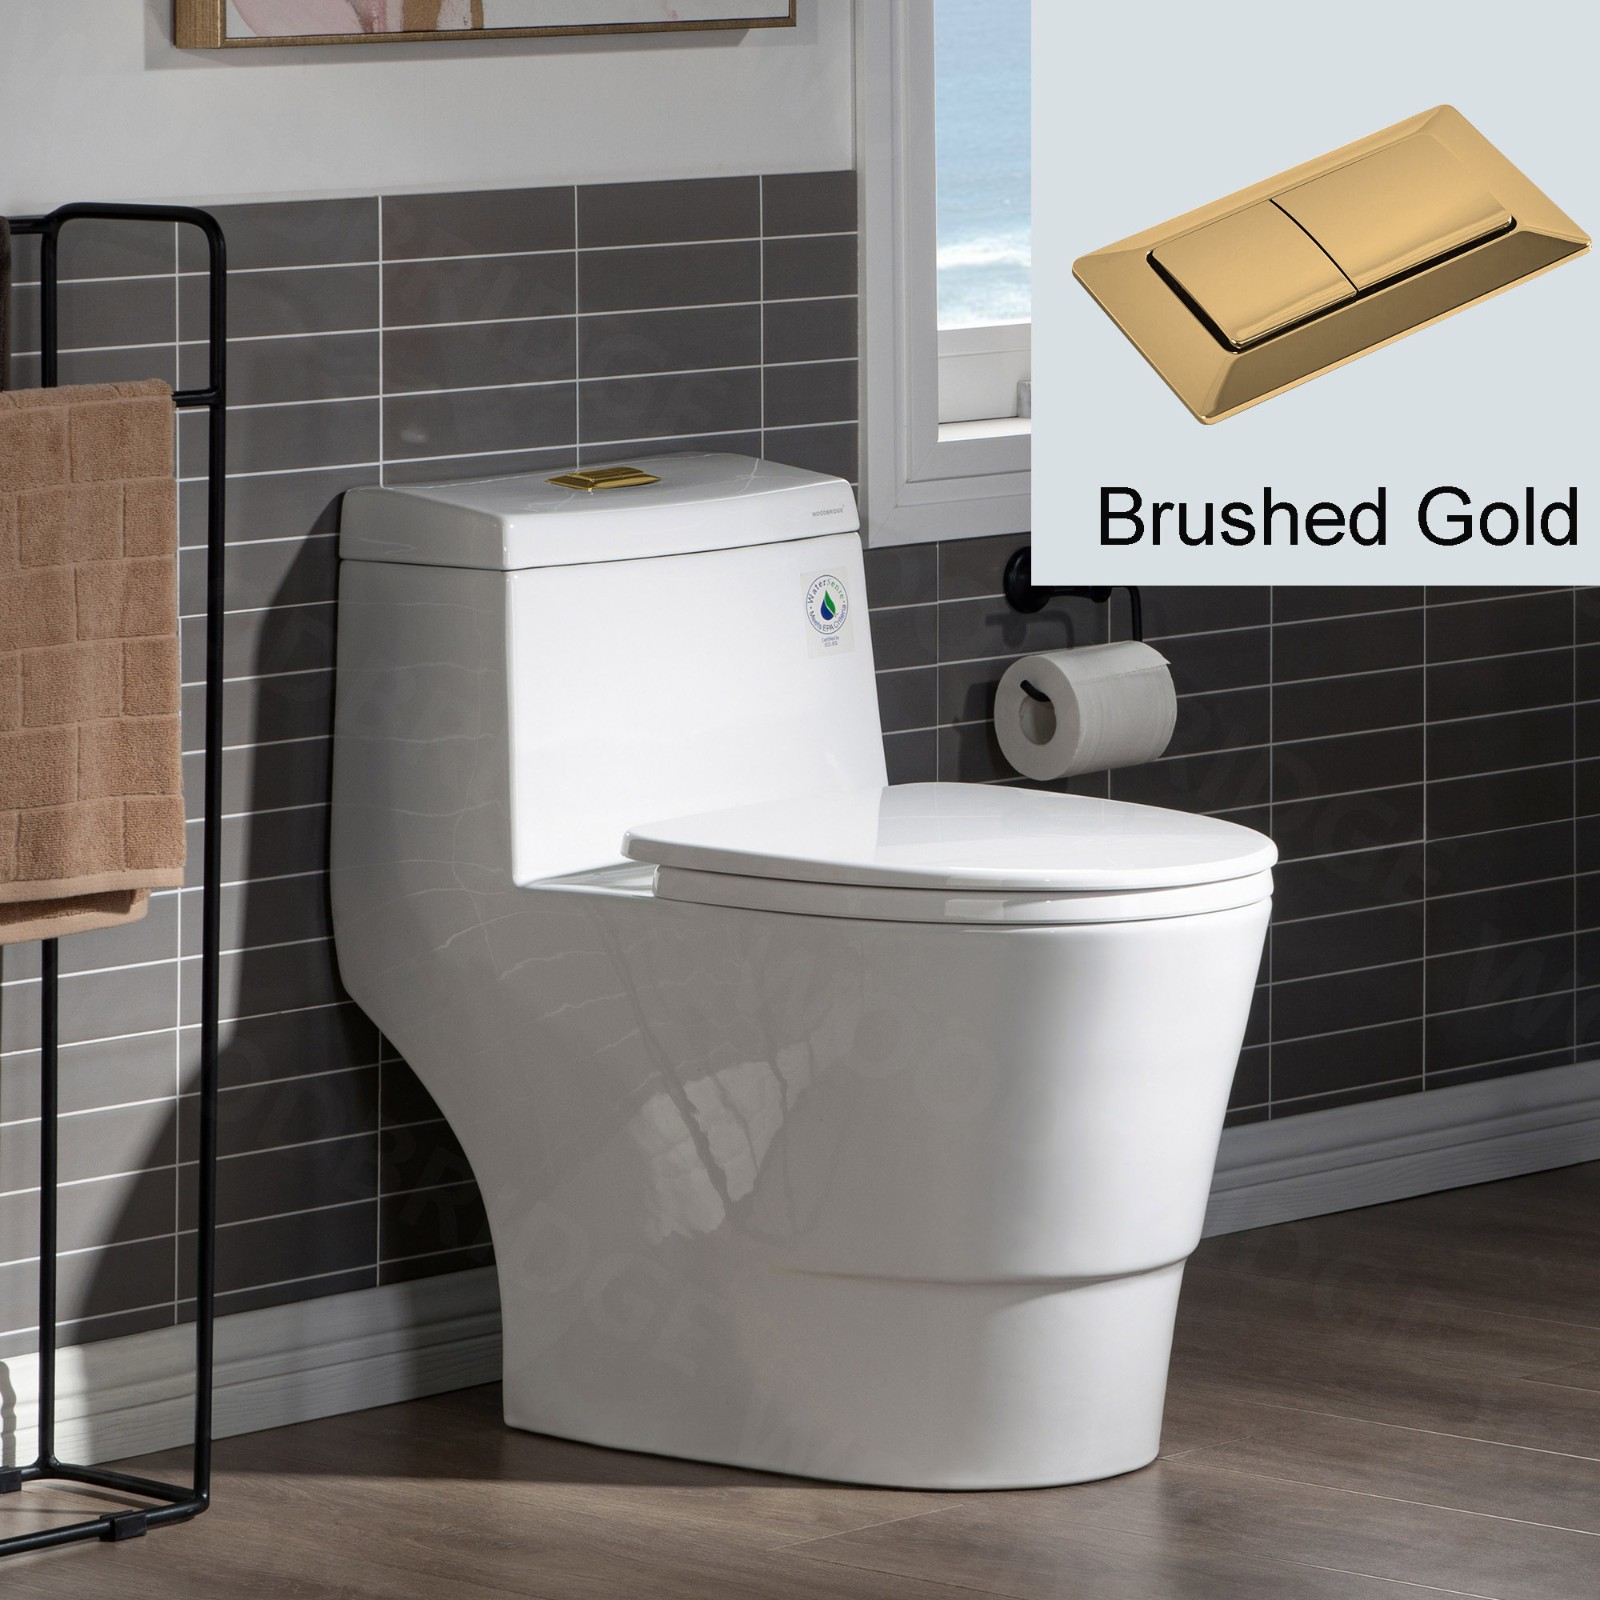  WOODBRIDGEE One Piece Toilet with Soft Closing Seat, Chair Height, 1.28 GPF Dual, Water Sensed, 1000 Gram MaP Flushing Score Toilet with Brushed Gold Button T0001-BG, White_5707